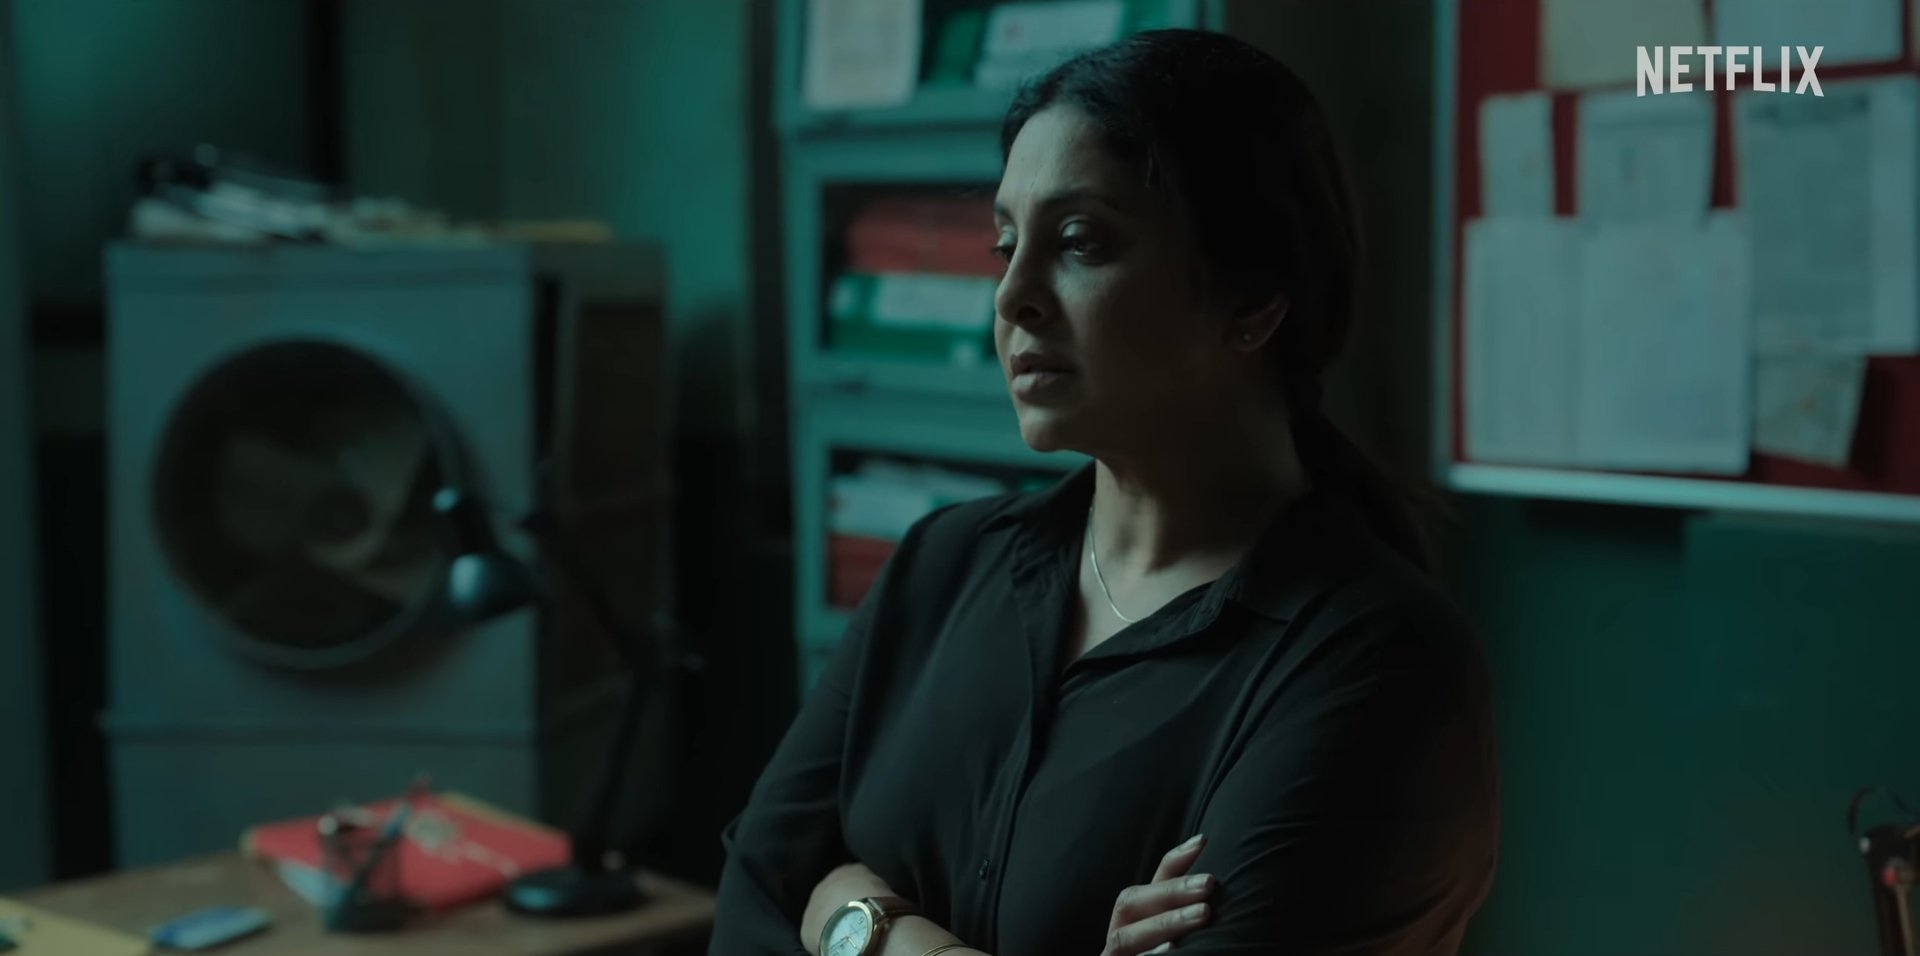 Delhi Crime S2 Trailer Shefali Shah And Team Are On A Mission To Nab A Serial Killer This Time